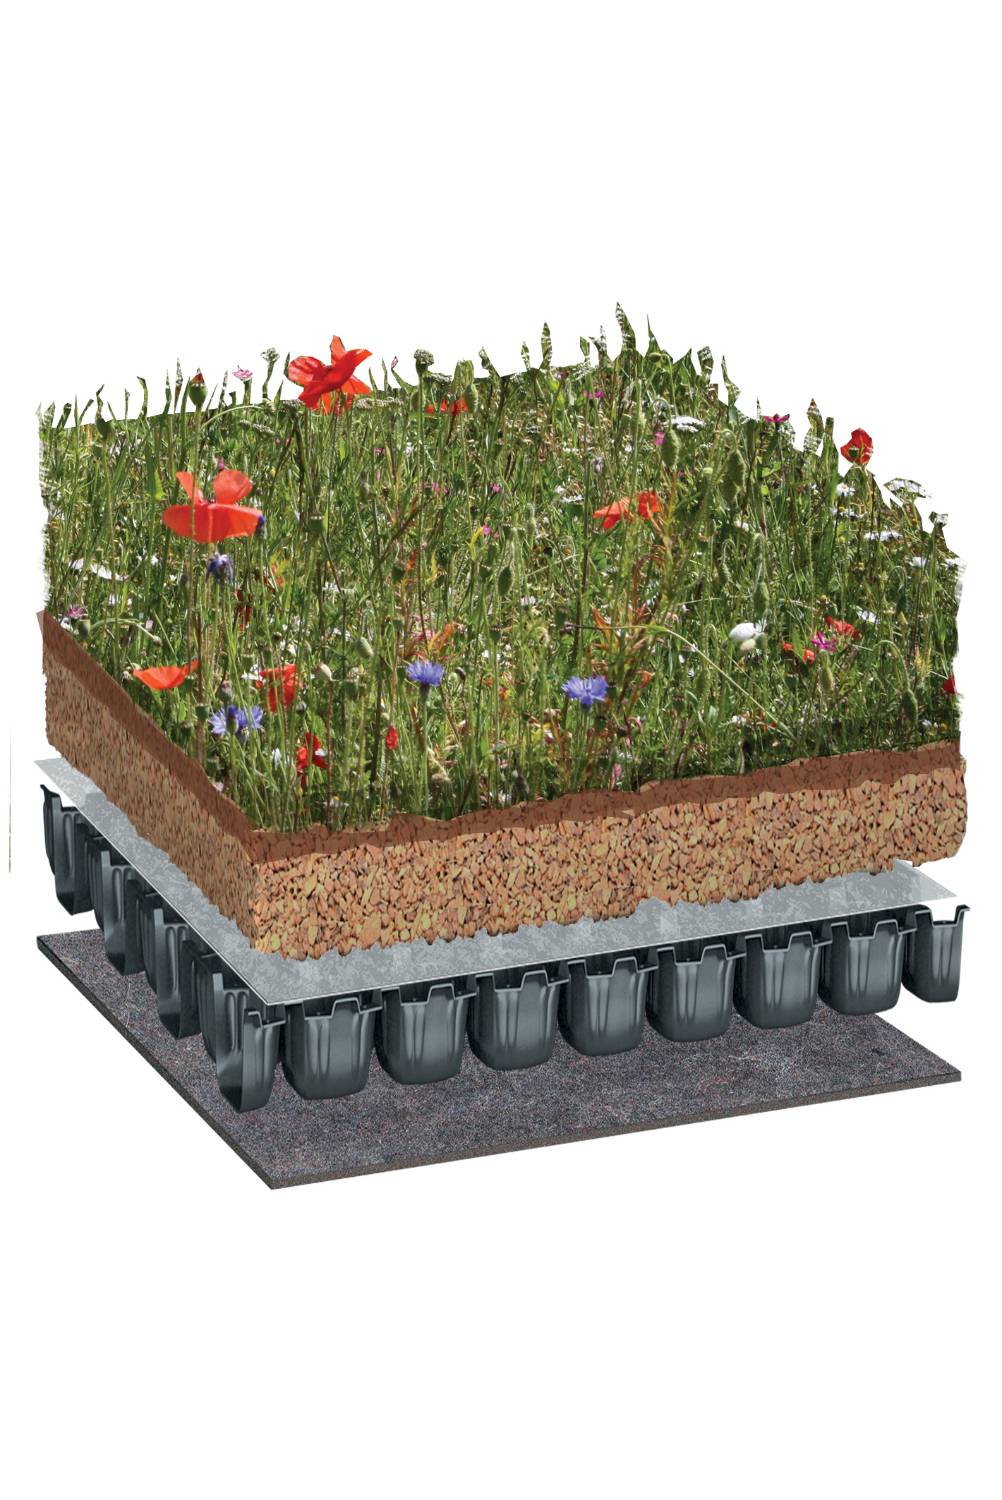 BauderGREEN WB Native Wildflower Blanket Biodiverse Green Roof System, Flat Roof